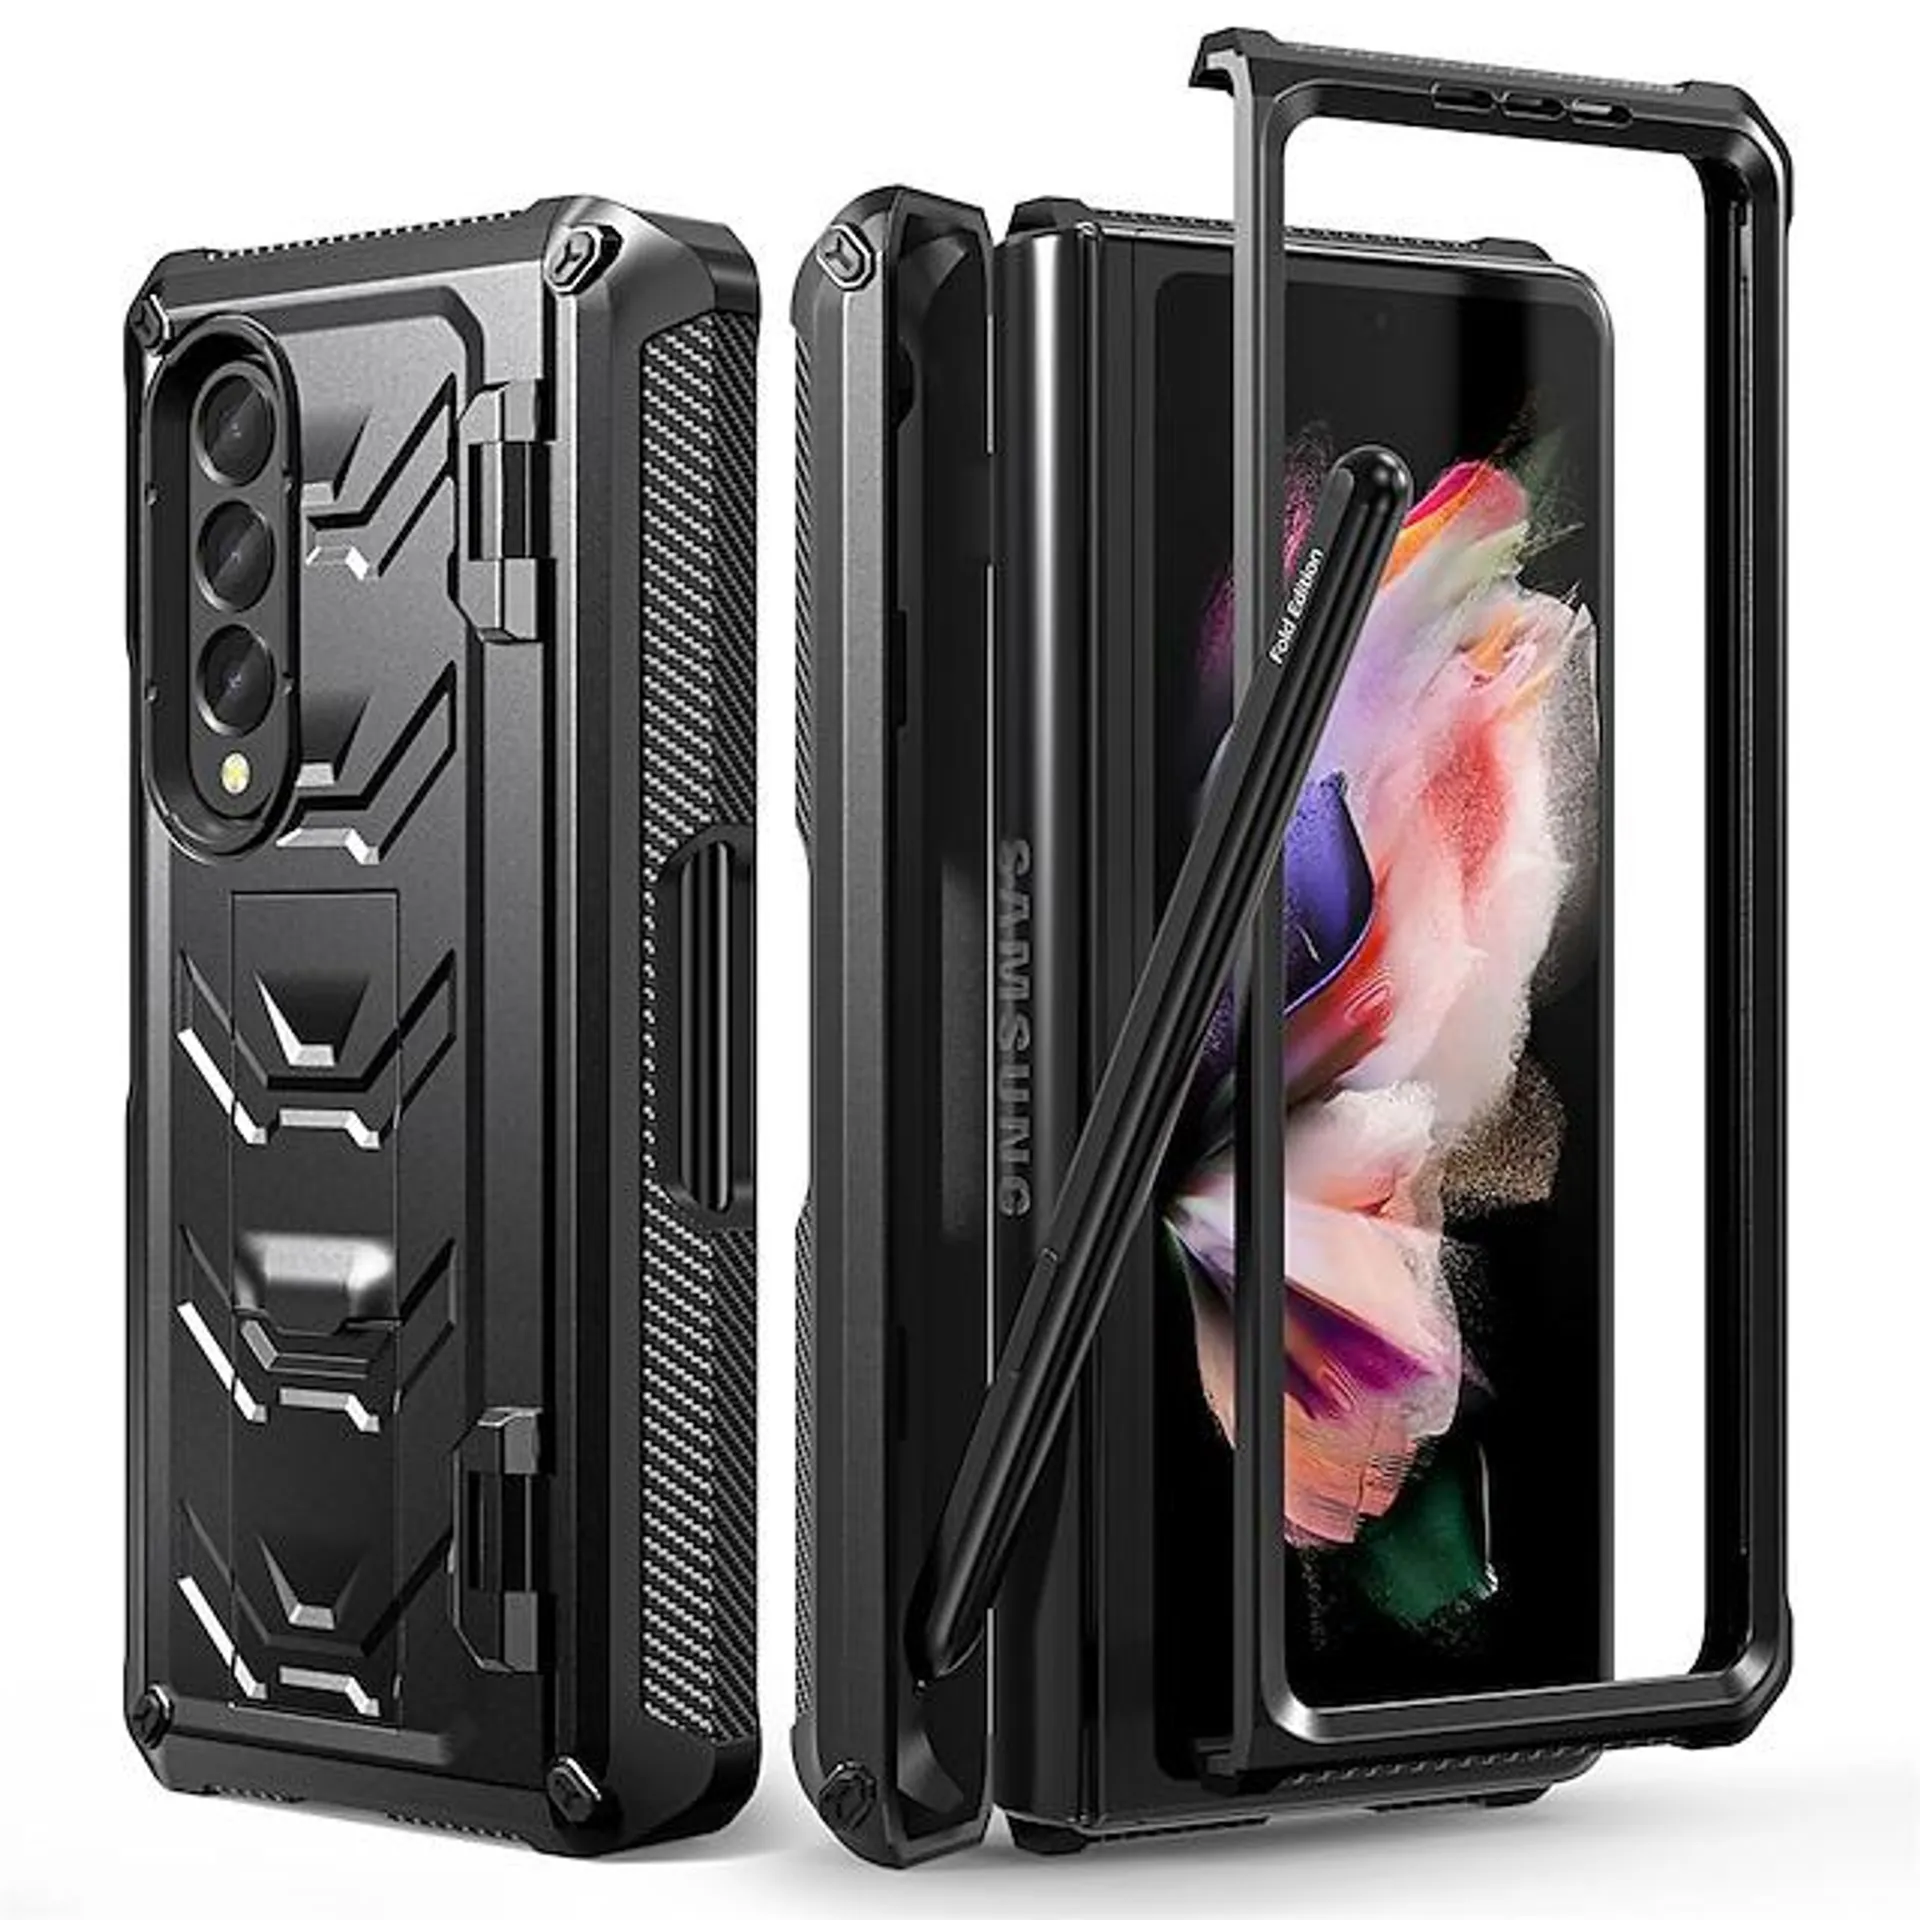 Fold Hinge Pen Slot Armor Case For Samsung Galaxy Z Fold 3 Fold3 Hard PC Cover with Screen Film Kickstand Pen Holder for S Pen